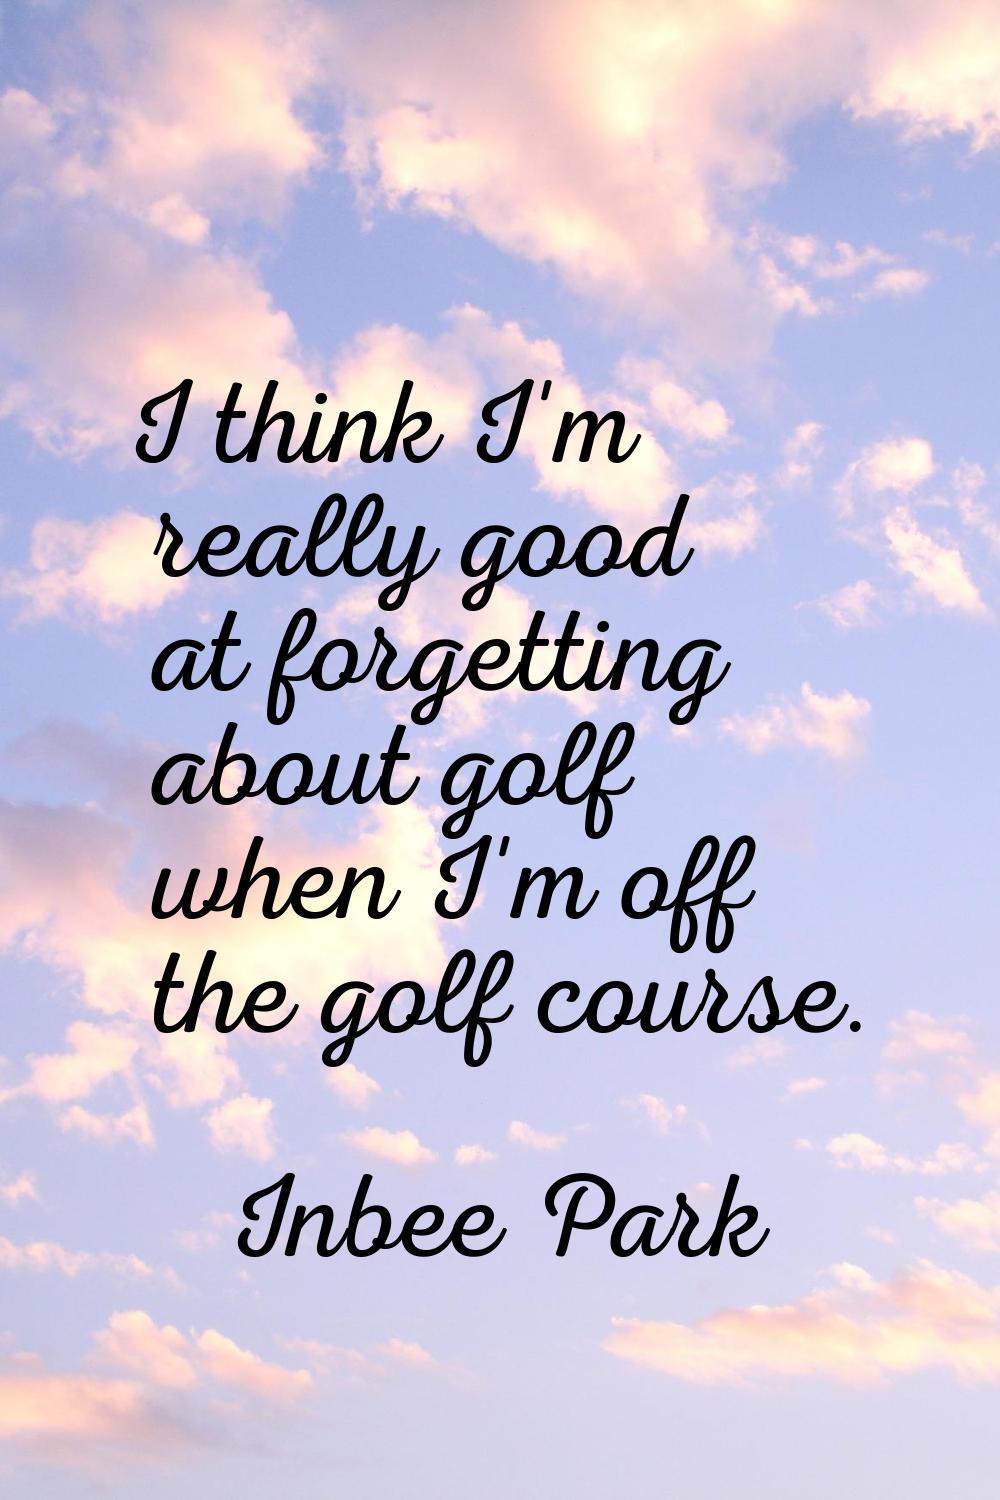 I think I'm really good at forgetting about golf when I'm off the golf course.